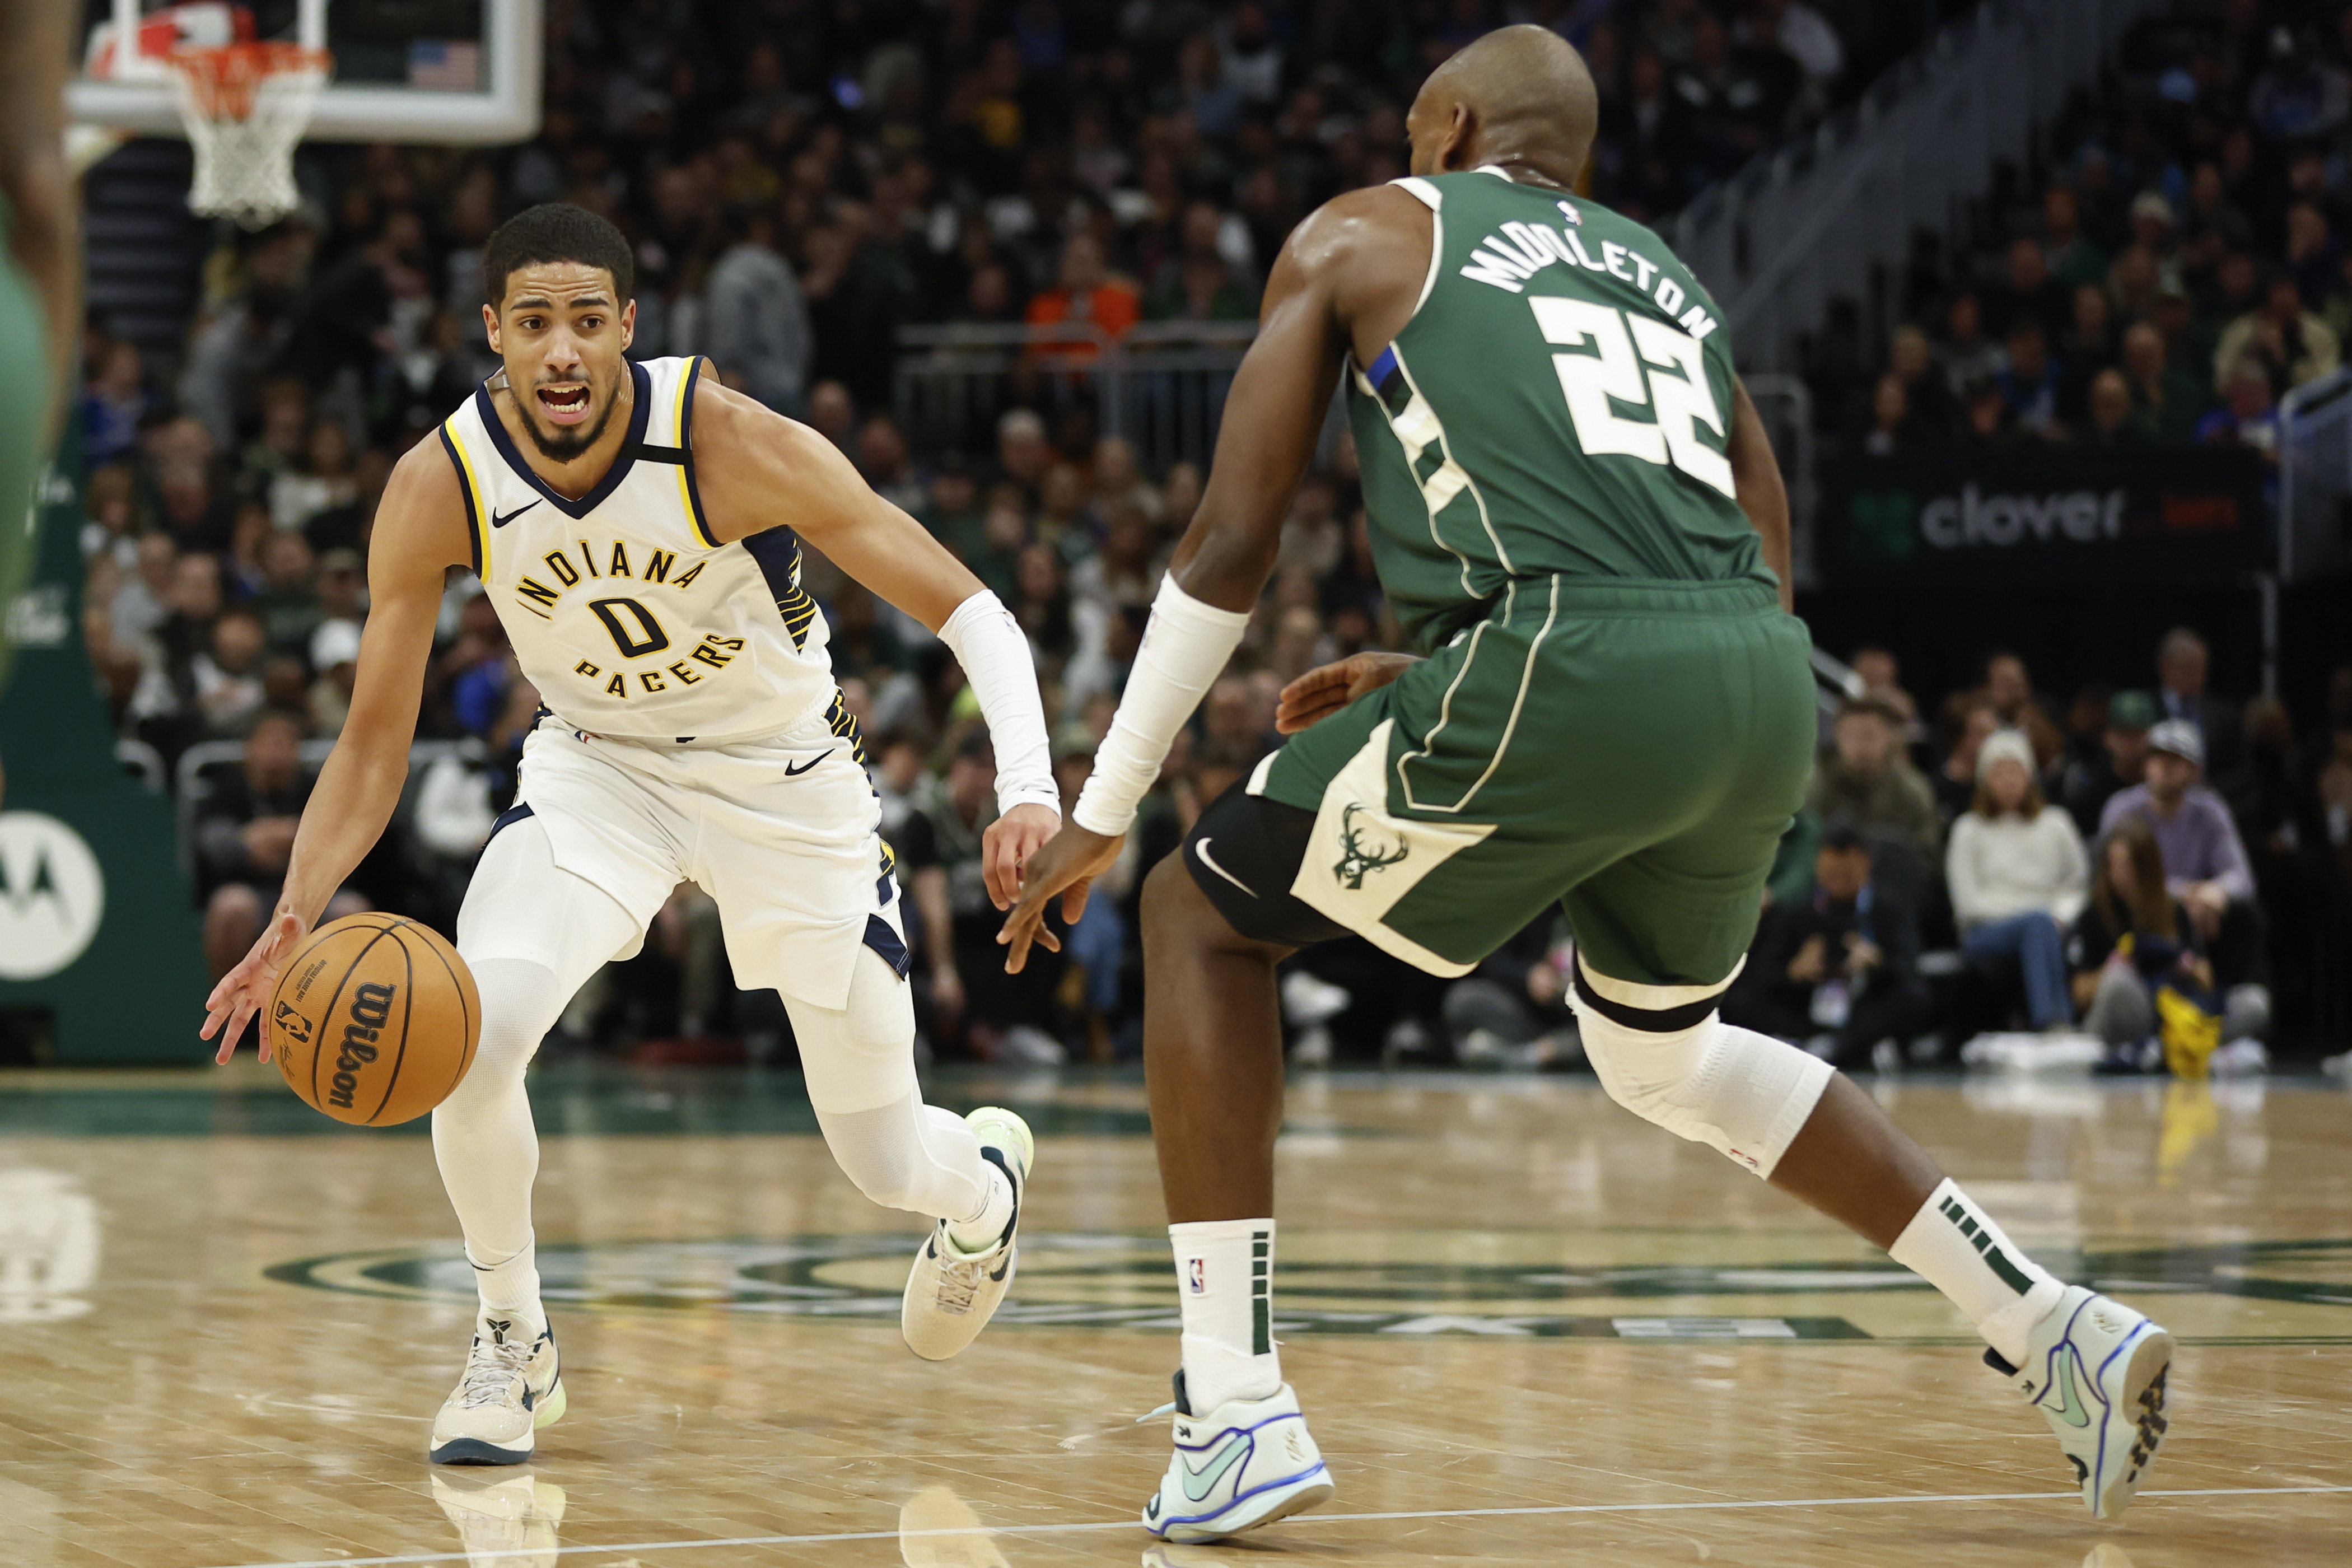 Pacers' backcourt shines in win over Bucks